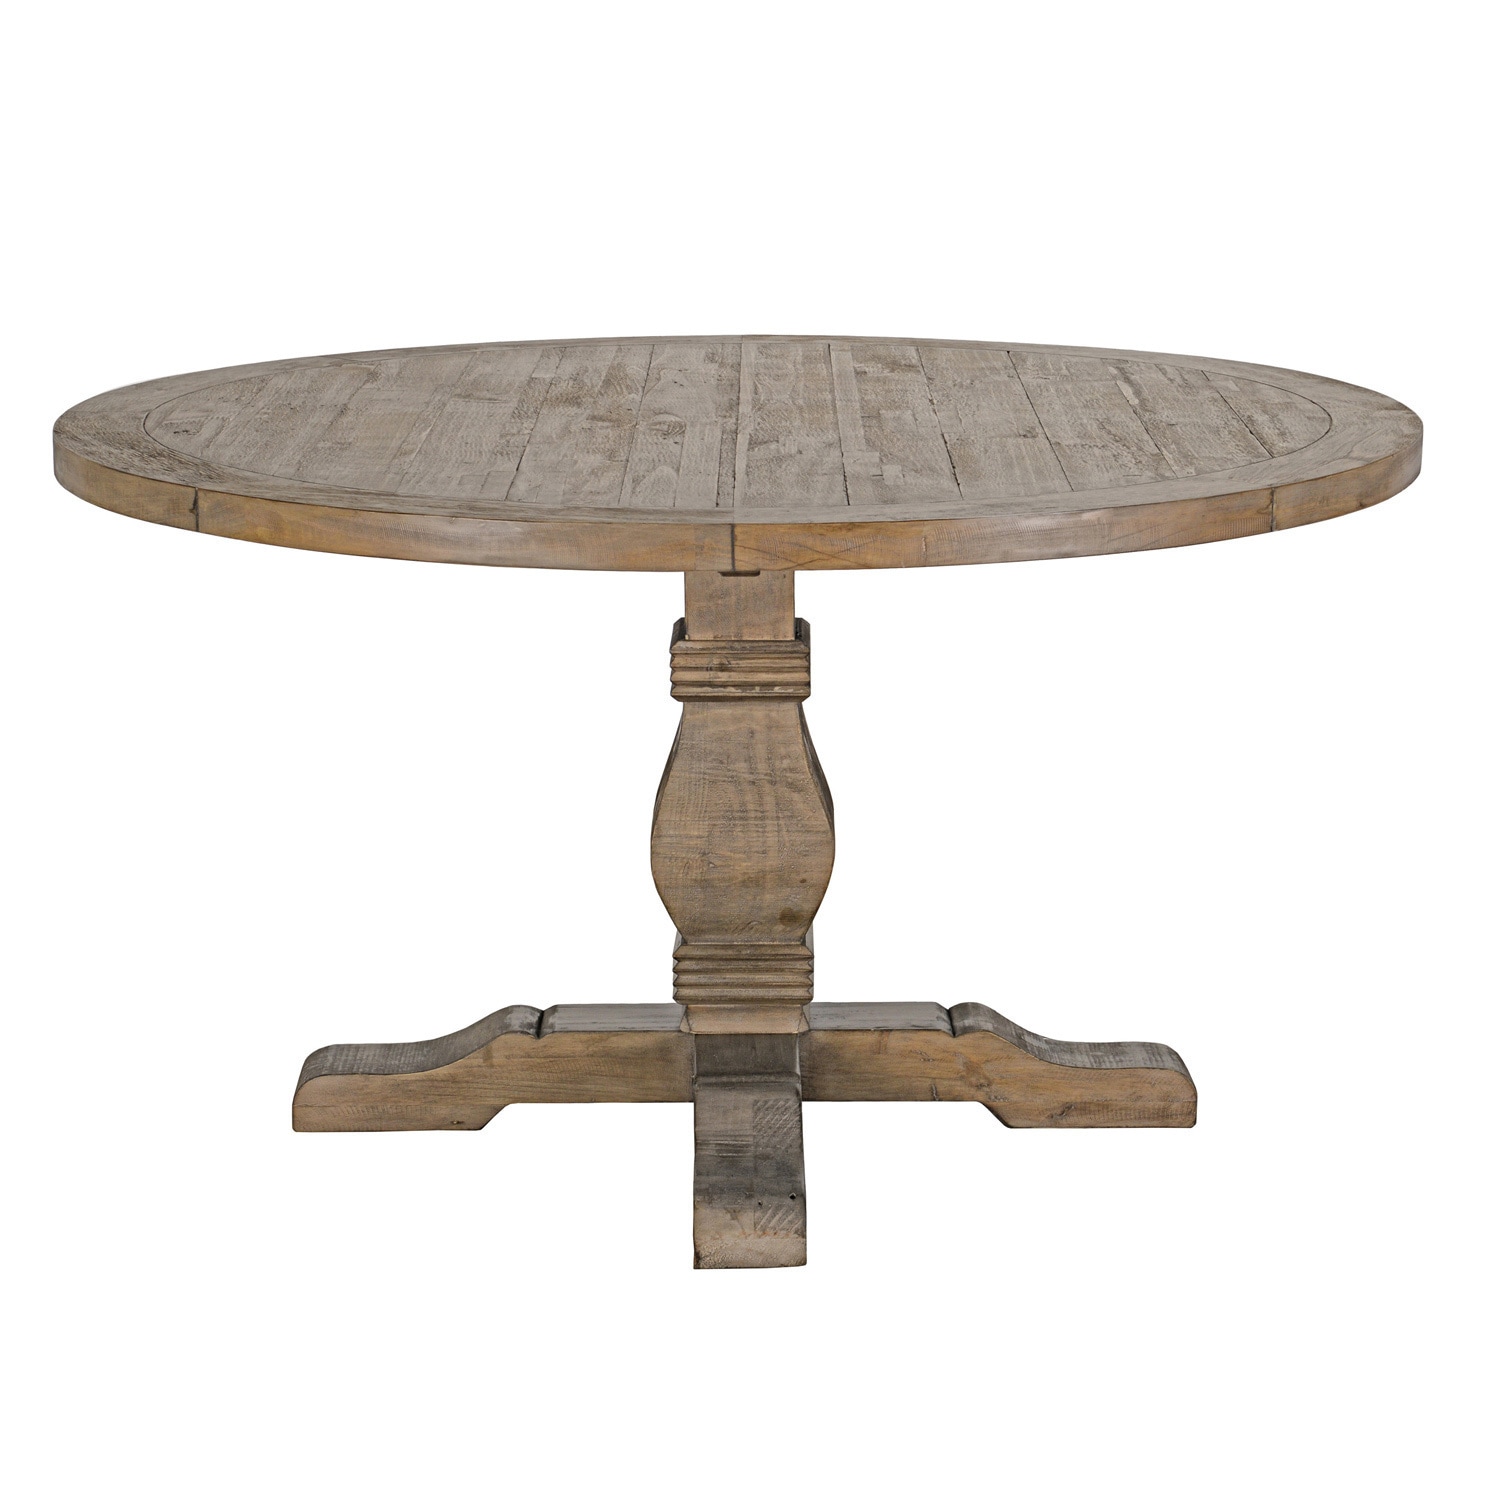 Shop Kasey Reclaimed Wood 55 Inch Round Dining Table By Kosas Home